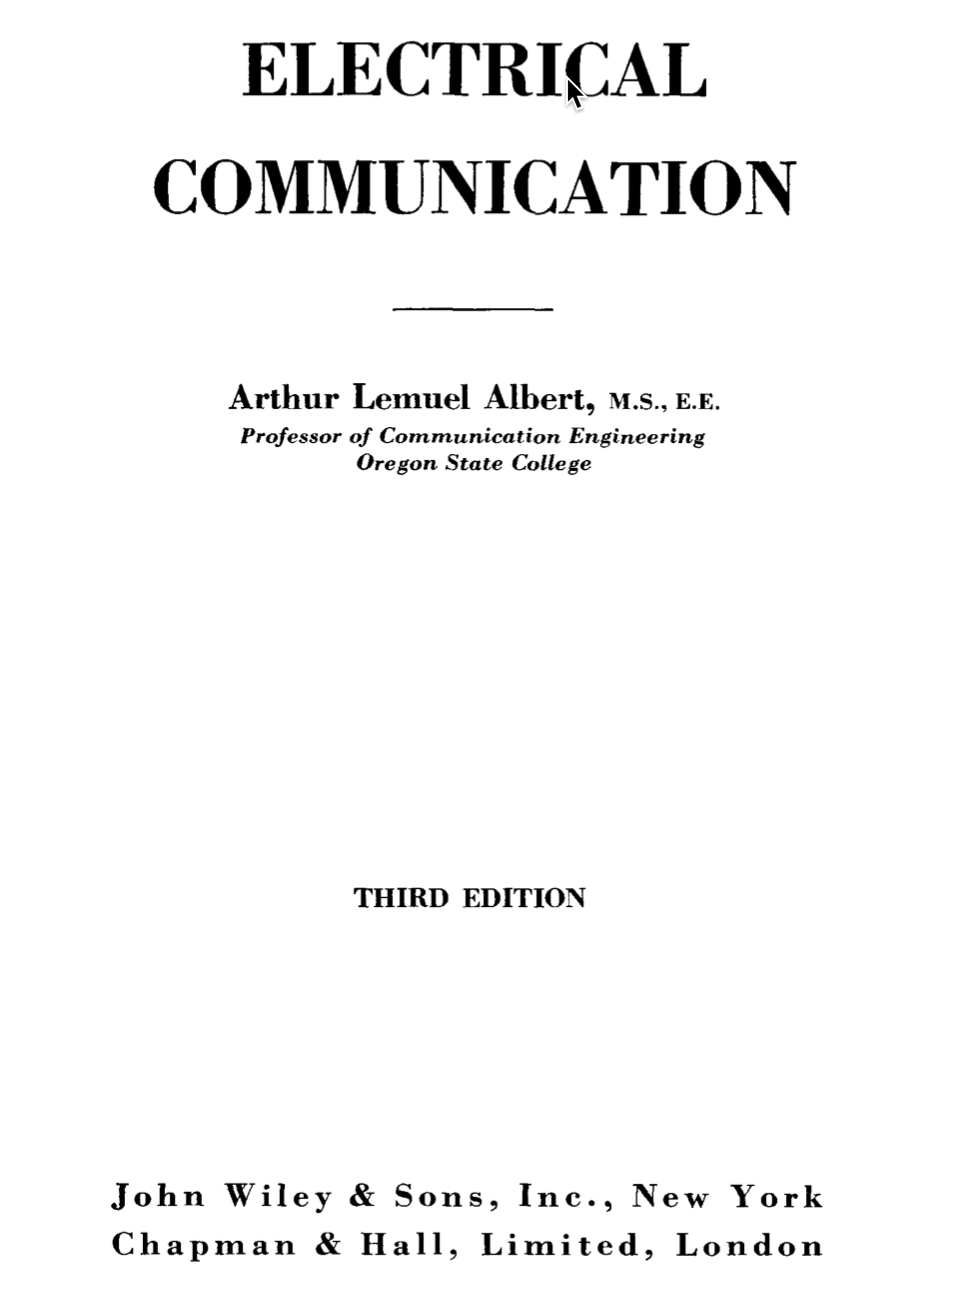 Electrical Communication (3rd Edition, 1954)